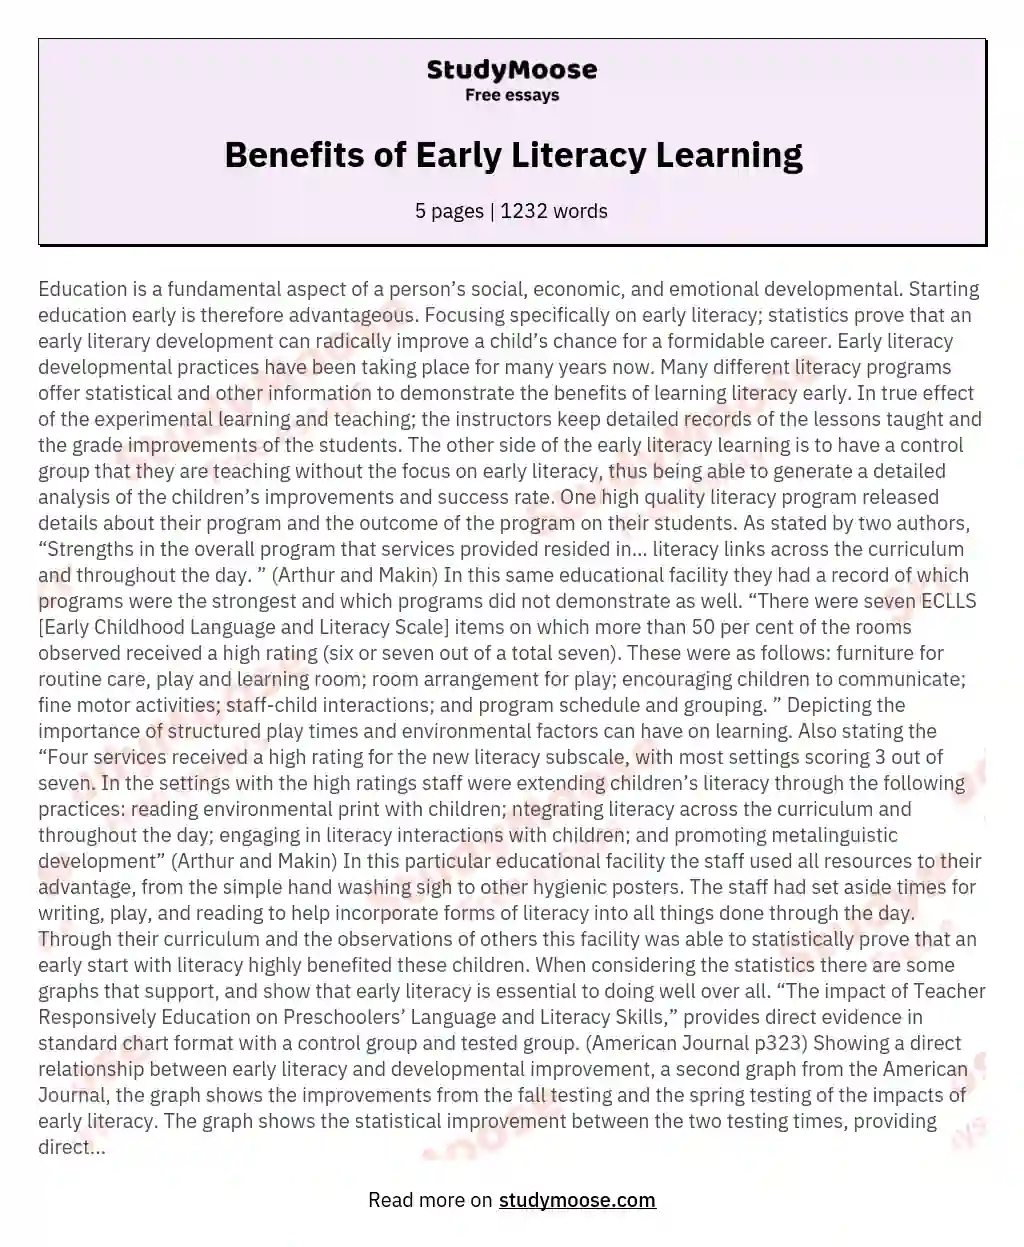 Benefits of Early Literacy Learning essay